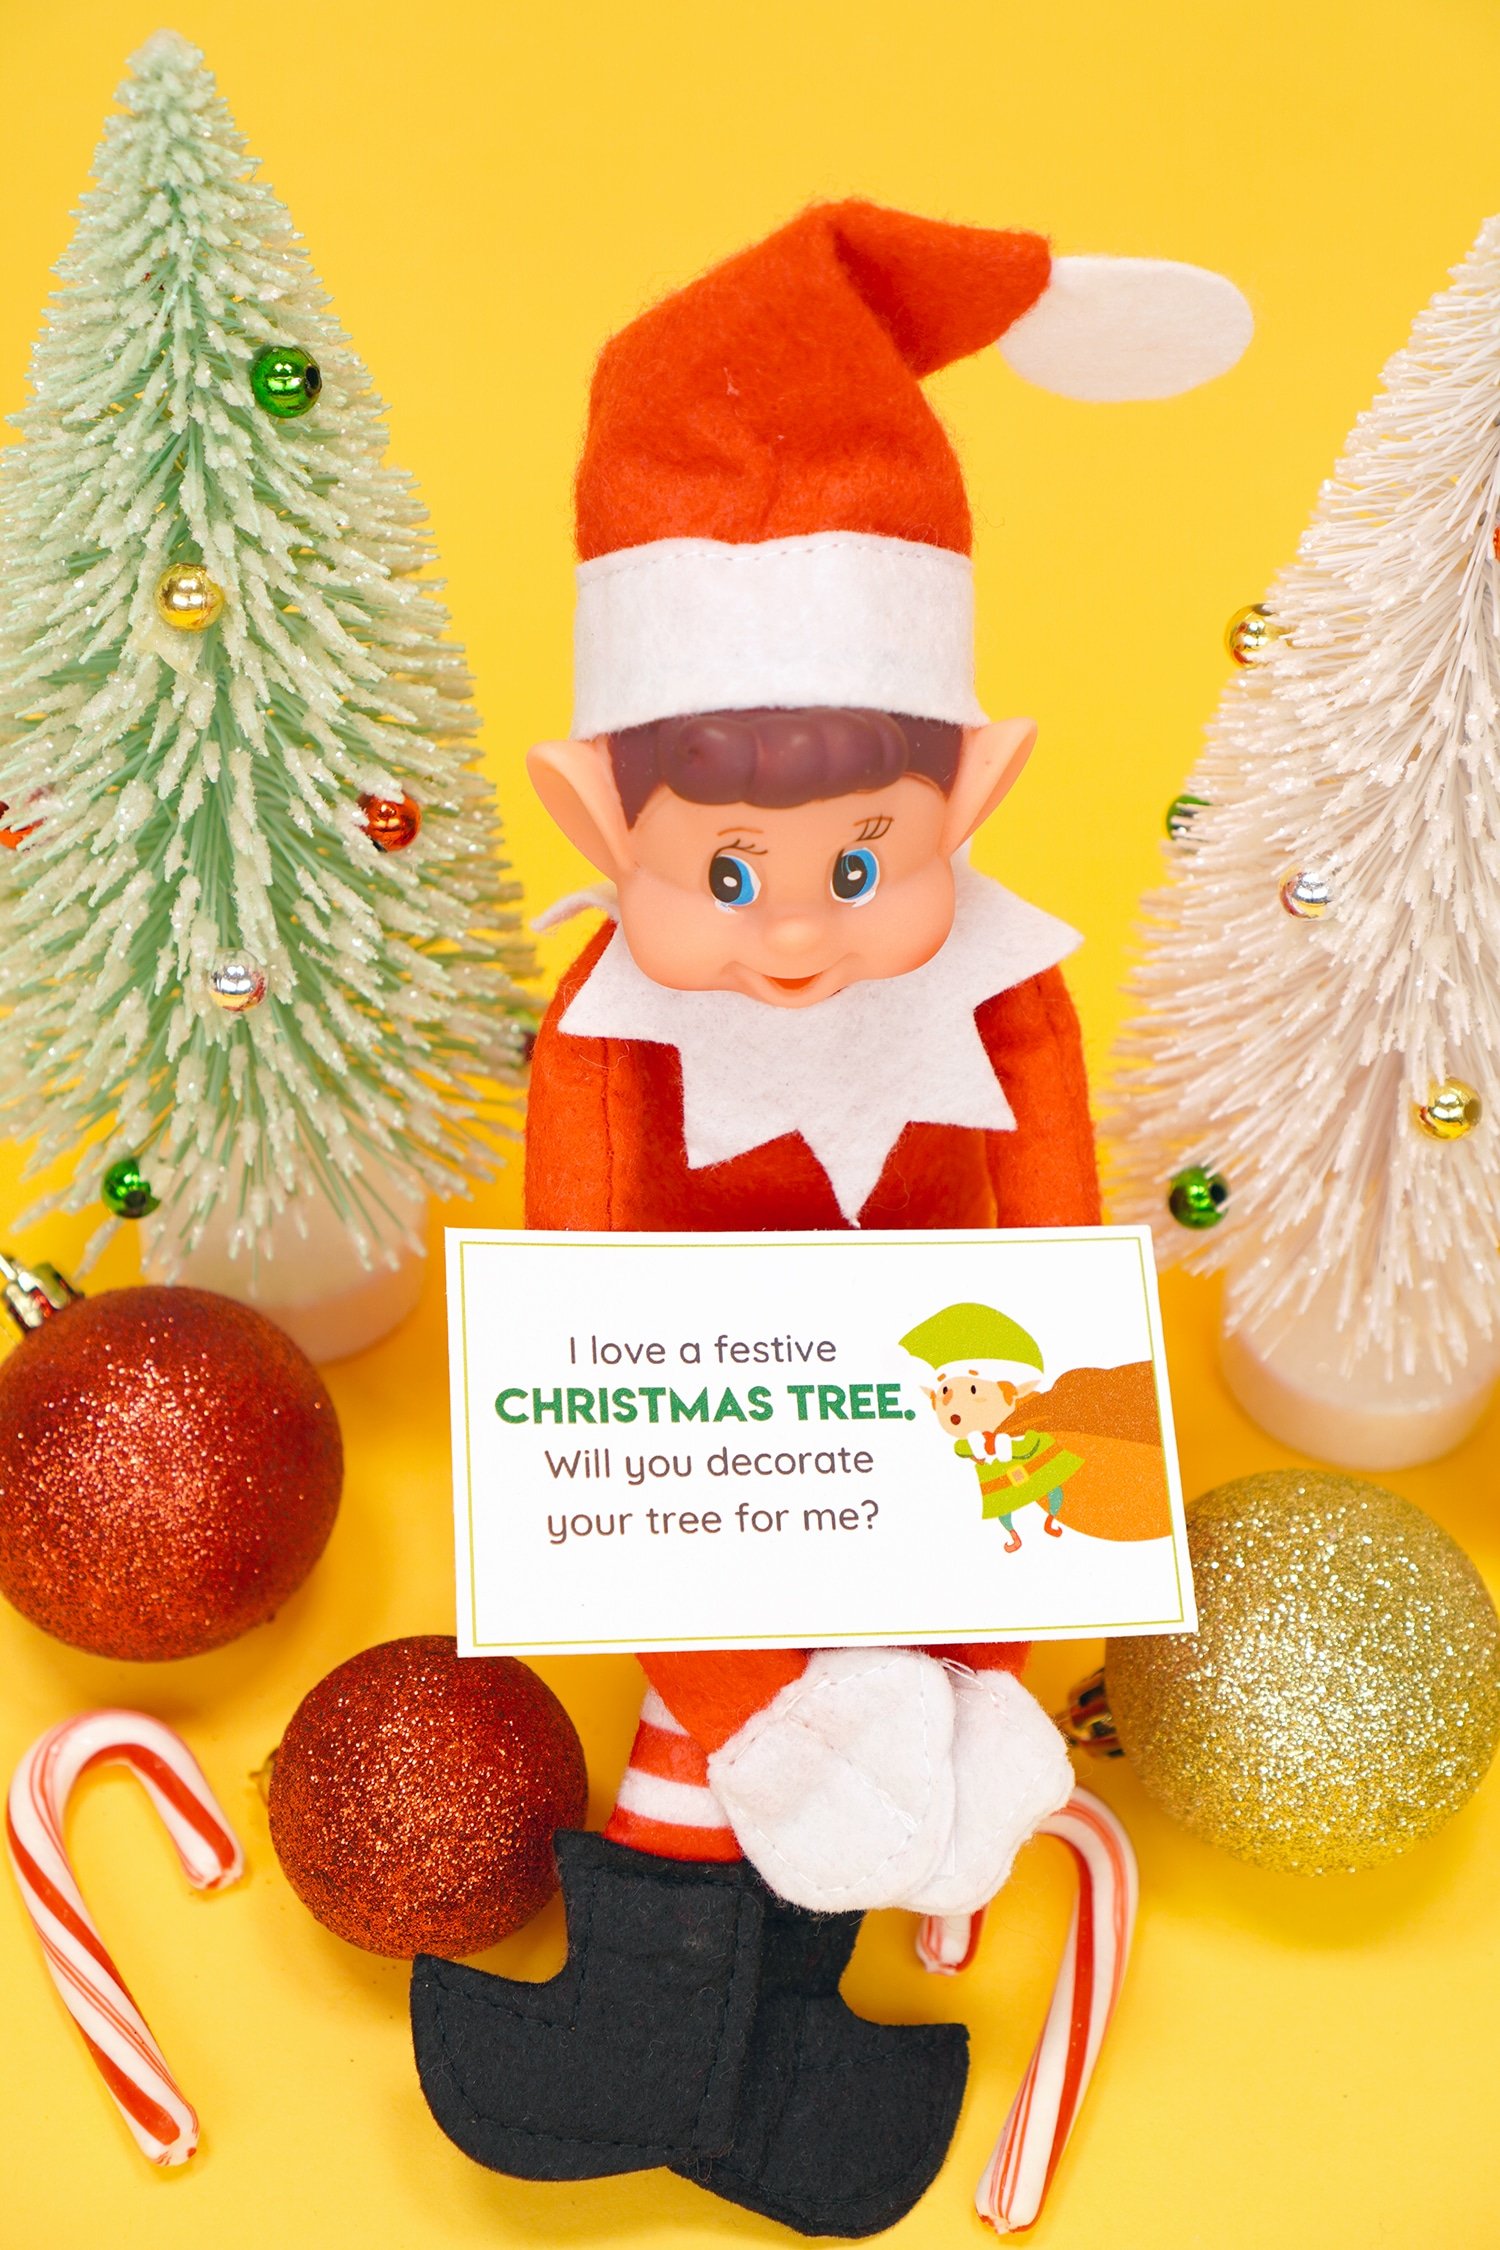 Elf doll holding a printable Elf on the Shelf note card with candy canes, ornaments, and glitter Christmas trees on yellow background